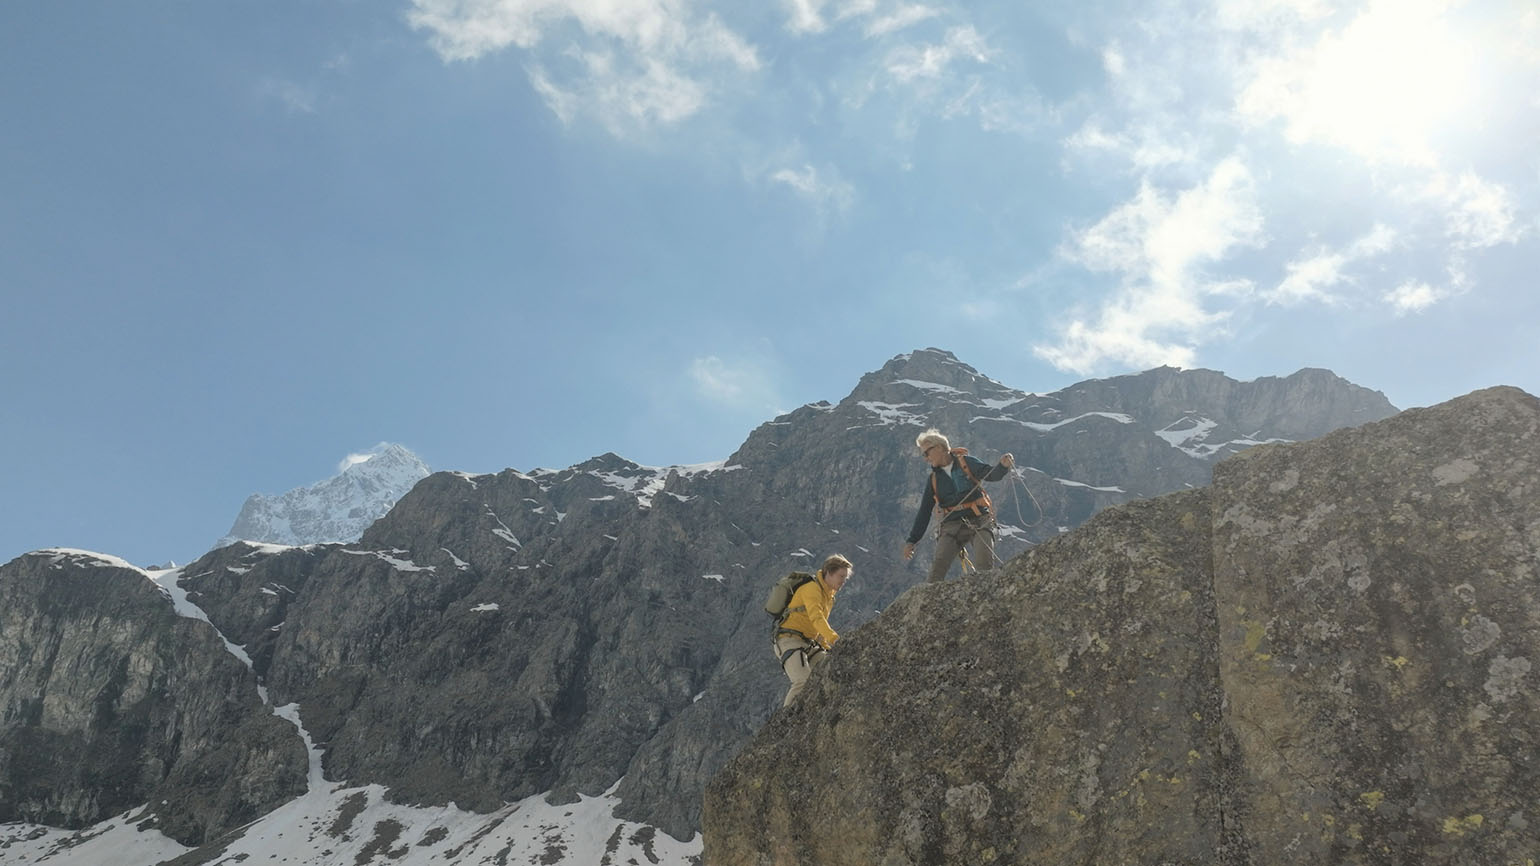 Two hikers on a mountain on a clear day strengthen bonds by helping each other.